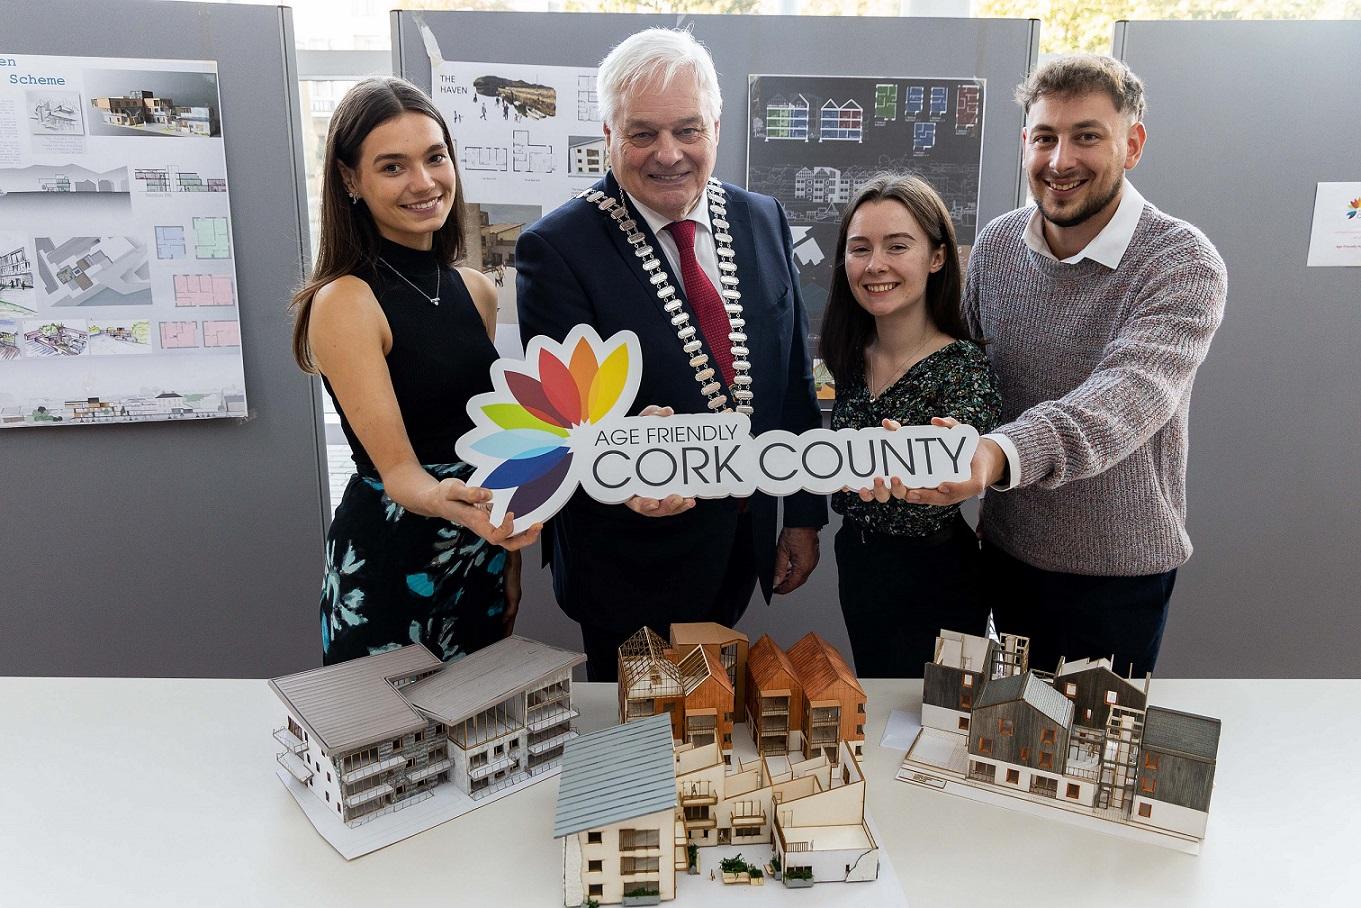 The Mayor of the County of Cork, Cllr Frank O'Flynn, and winners, Amy Cotter, 1st, Kamil Labuda, 2nd, and Ellie O'Connell, 3rd, at Cork County Hall for the award ceremony of the Cork County Age Friendly Architecture Competition.